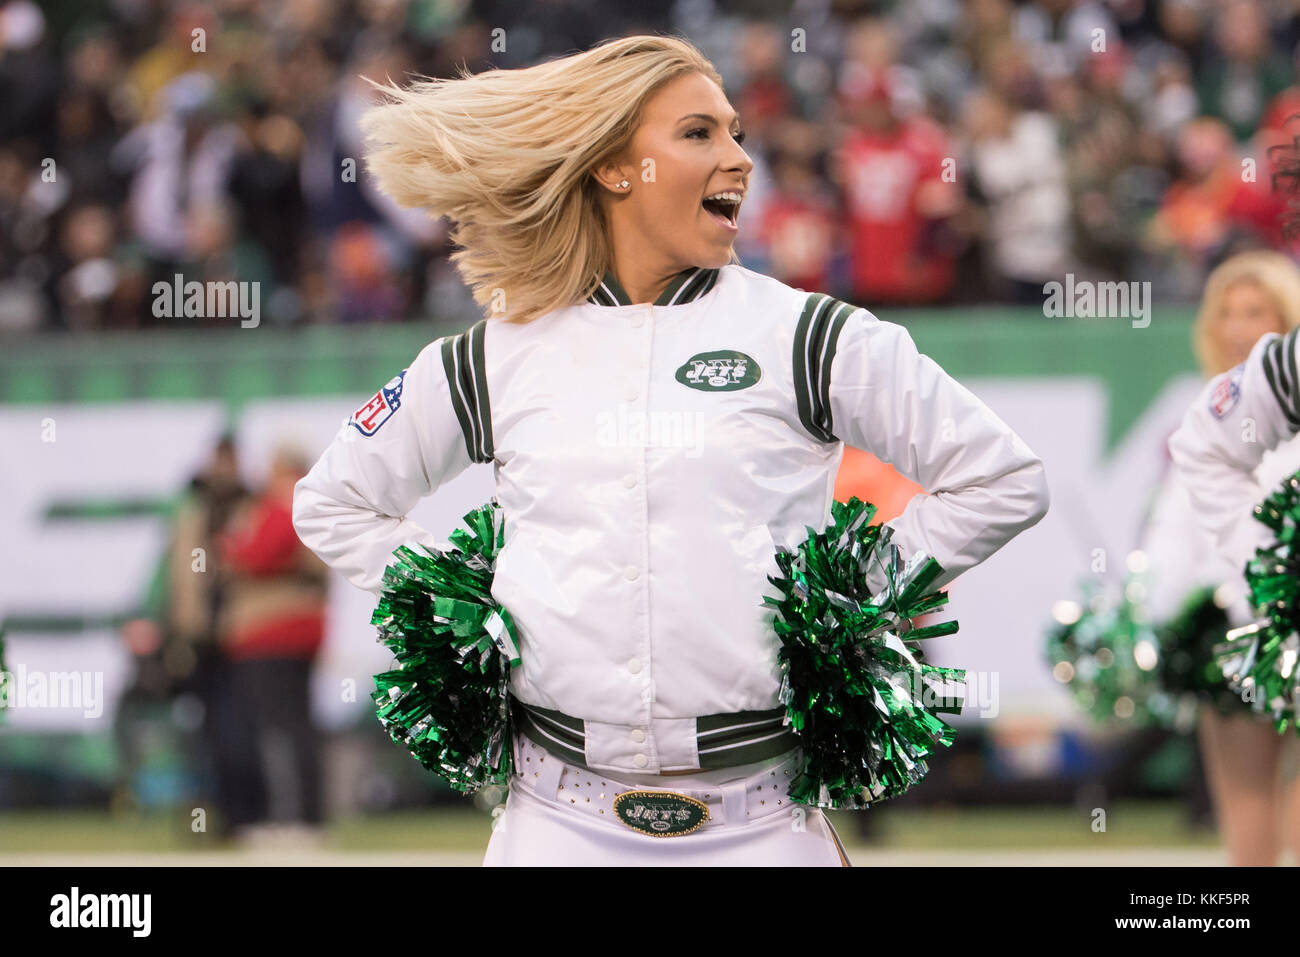 East Rutherford, New Jersey, USA. 3rd Dec, 2017. New York Jets Flight Crew in action during the NFL game between the Kansas City Chiefs and the New York Jets at MetLife Stadium in East Rutherford, New Jersey. The New York Jets won 38-31. Christopher Szagola/CSM/Alamy Live News Stock Photo